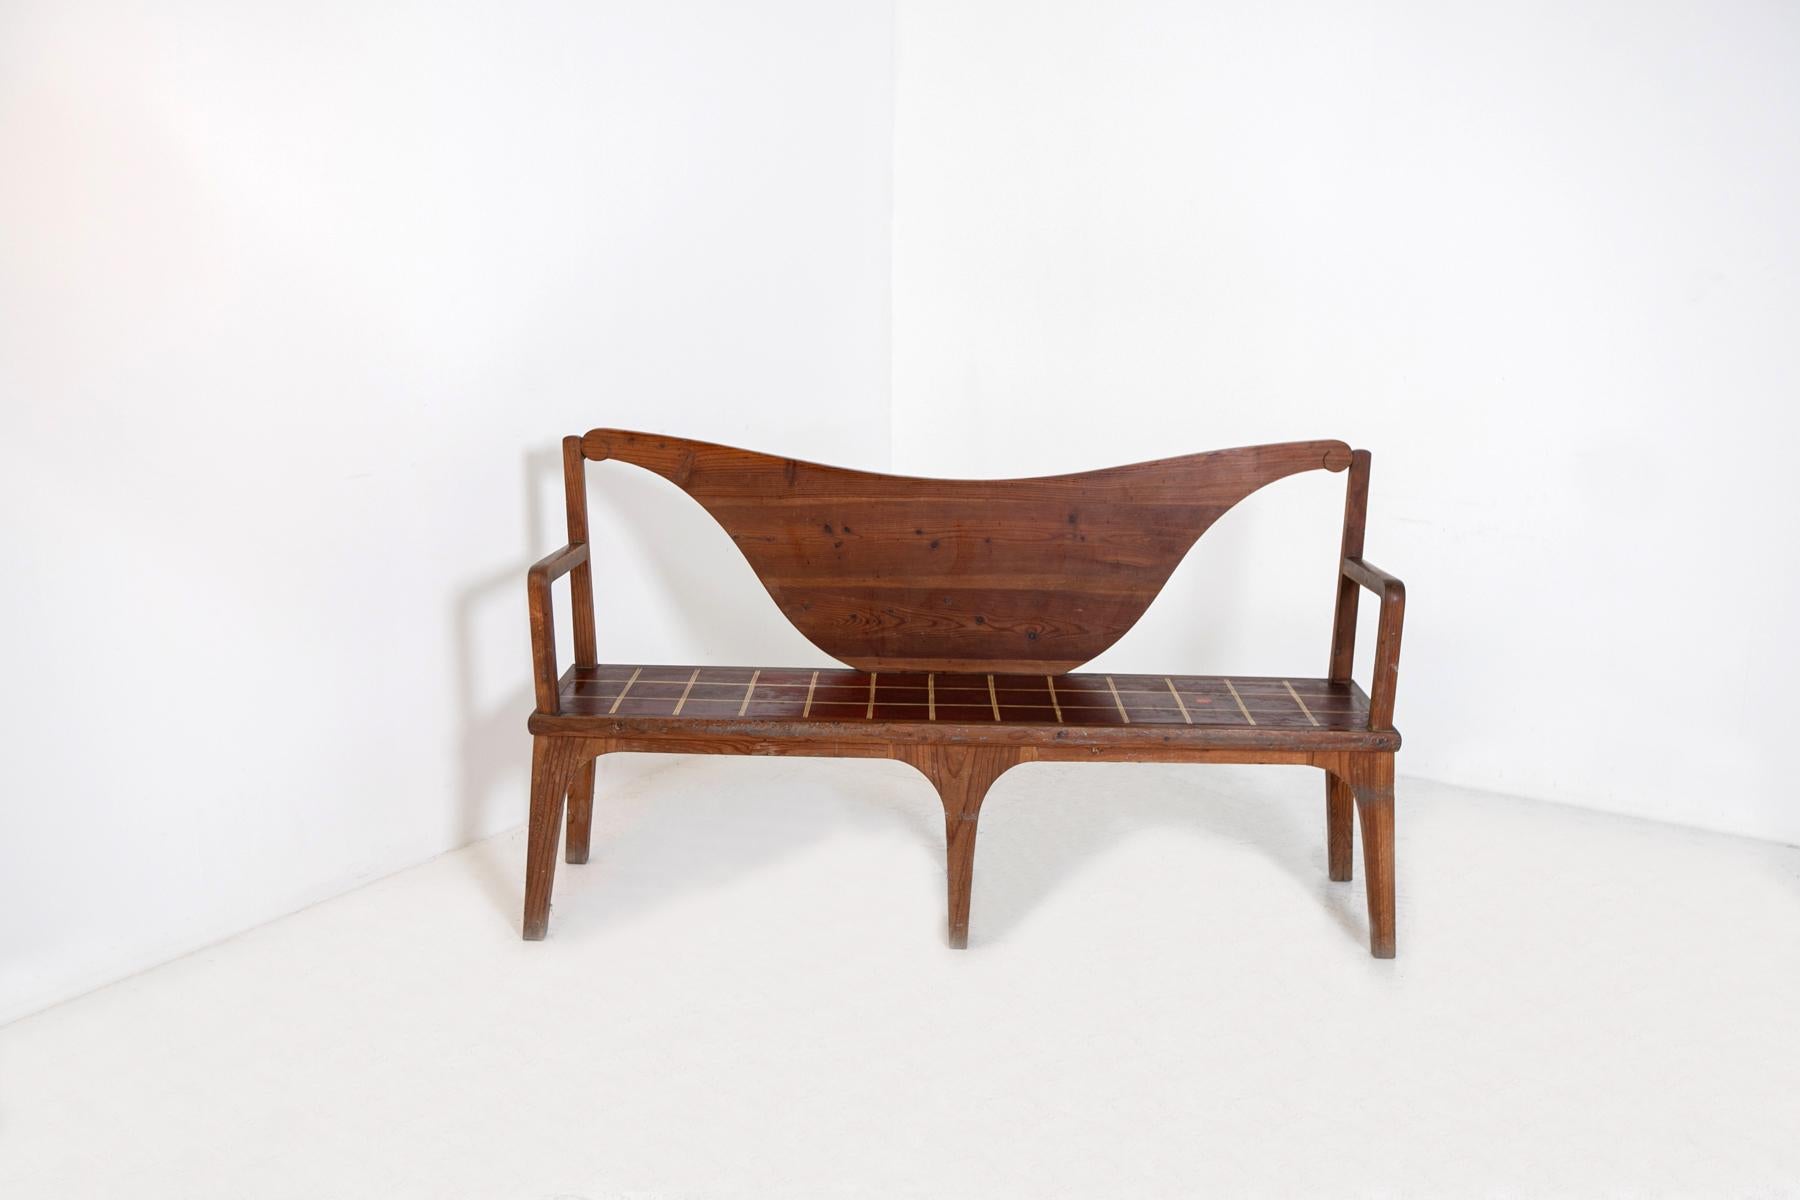 Wonderful bench in fine wood by Paolo Buffa of 1950.
The bench of Paolo Buffa has a back with a particular shape, the seat has modular squares of gold color.
The bench thanks to its classic design can be placed in all rooms of the house and garden